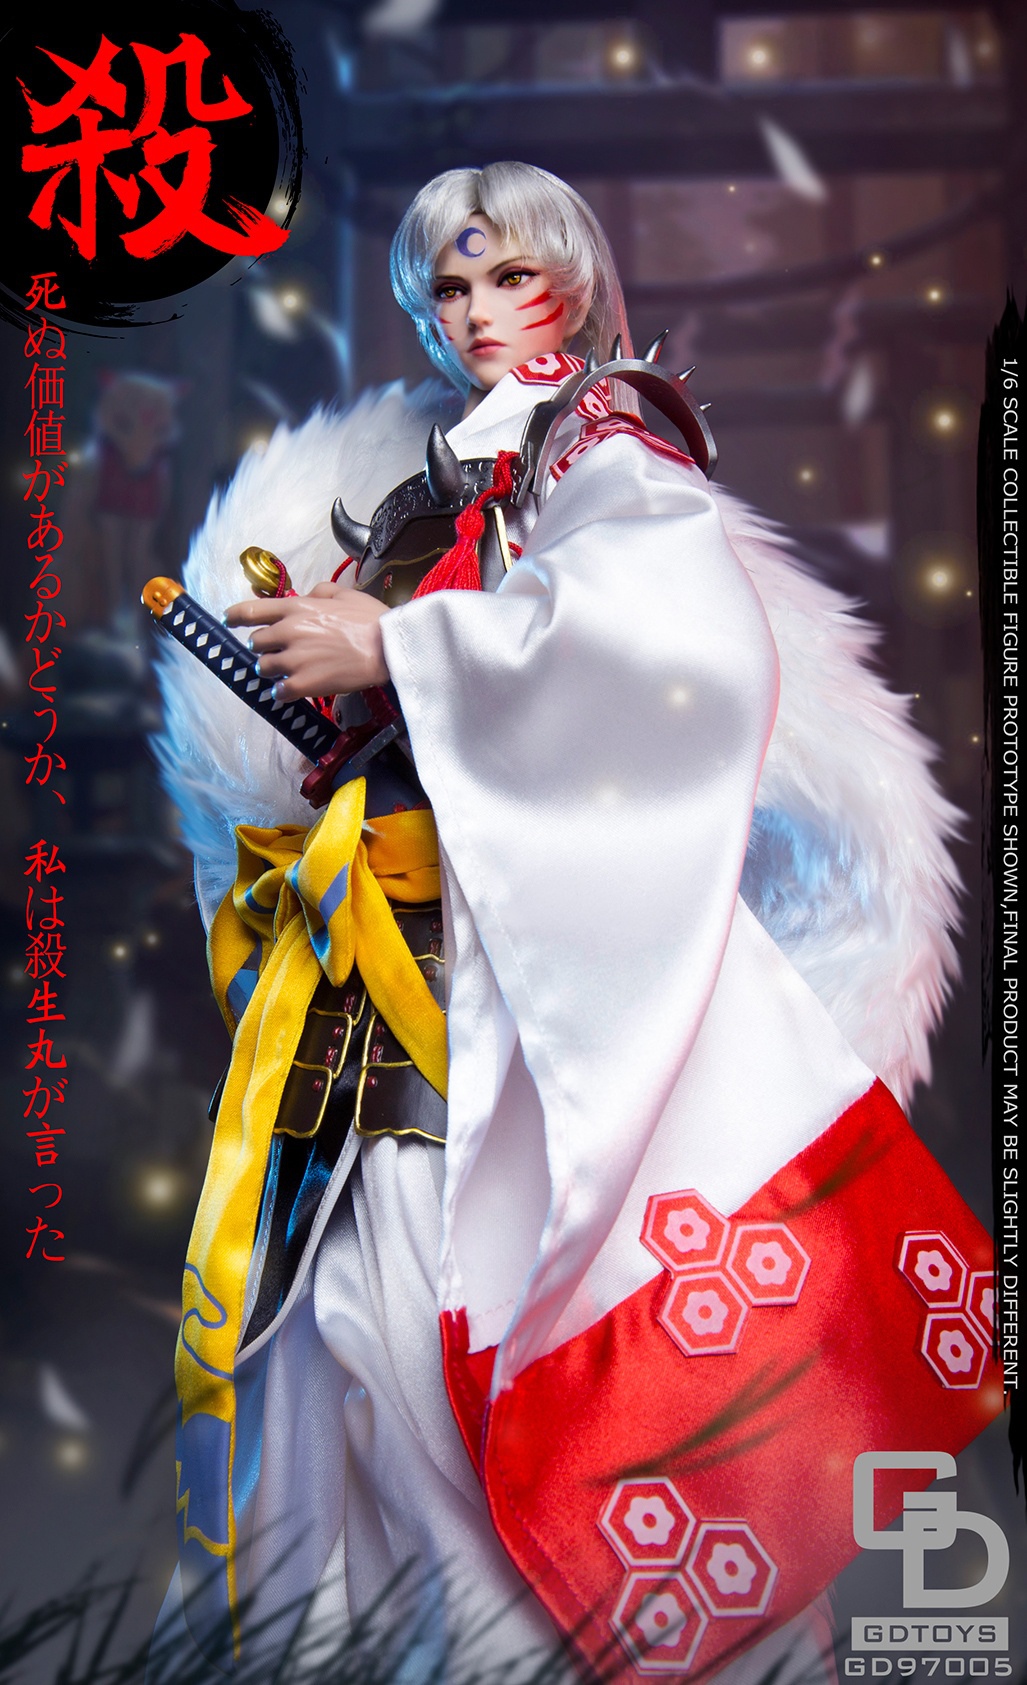 NEW PRODUCT: GDTOYS - Son of the Fighting Tooth King - Dog Demon Swordsman GD97005 0690